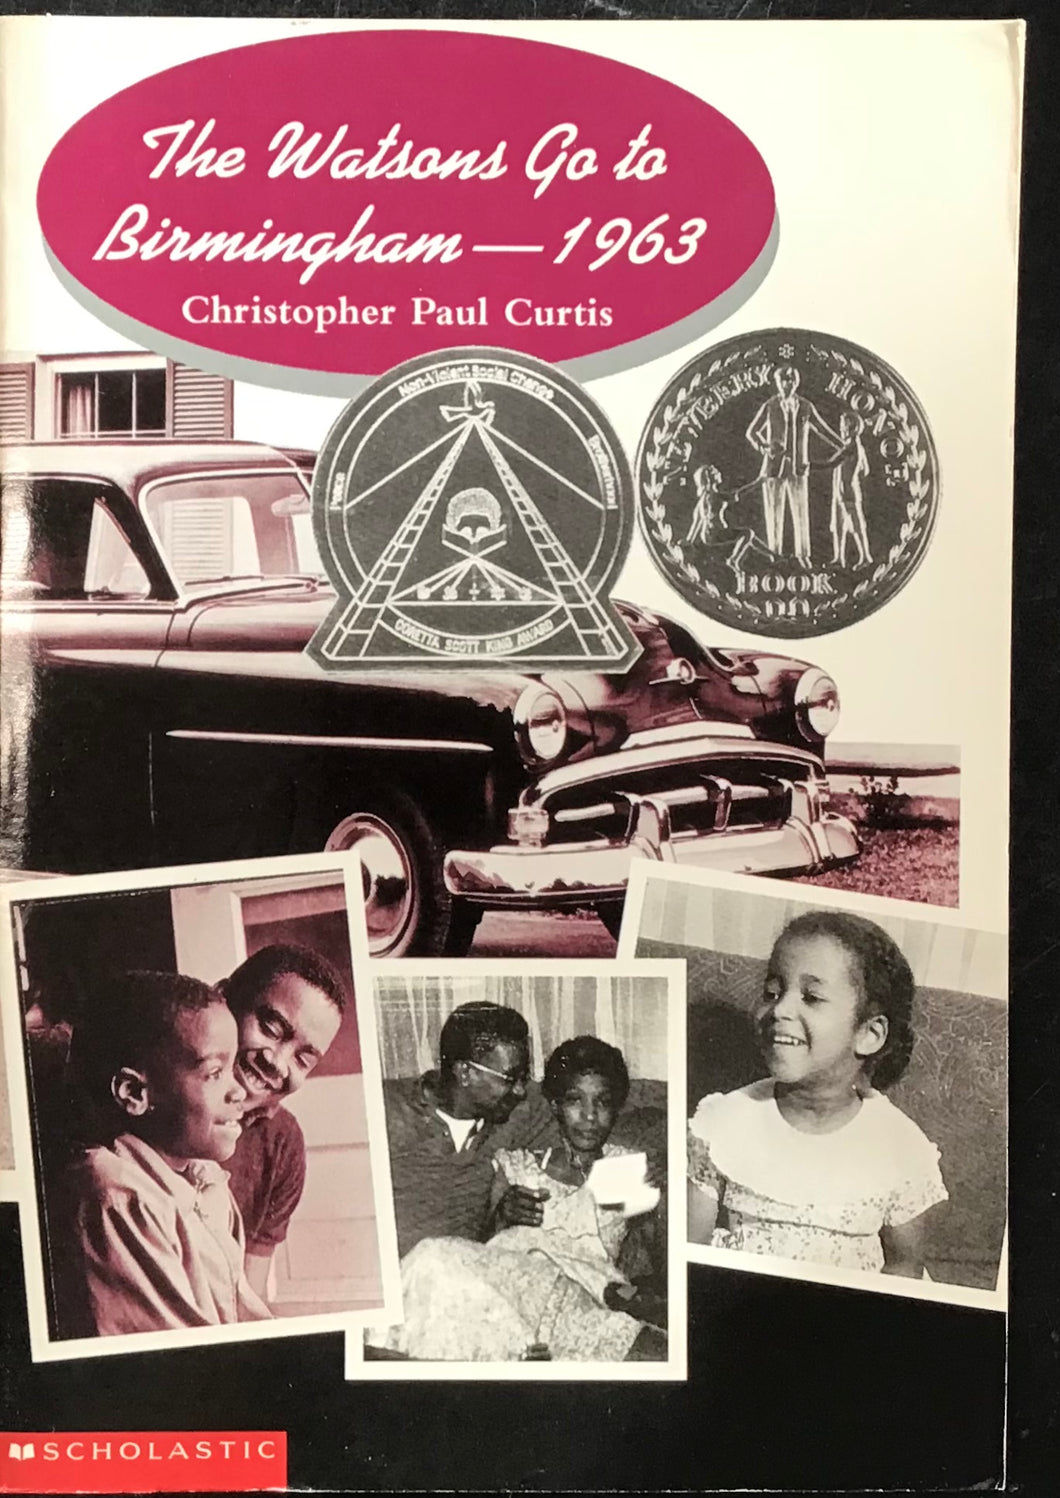 The Watsons Go to Birmingham— 1963, Christopher Paul Curtis